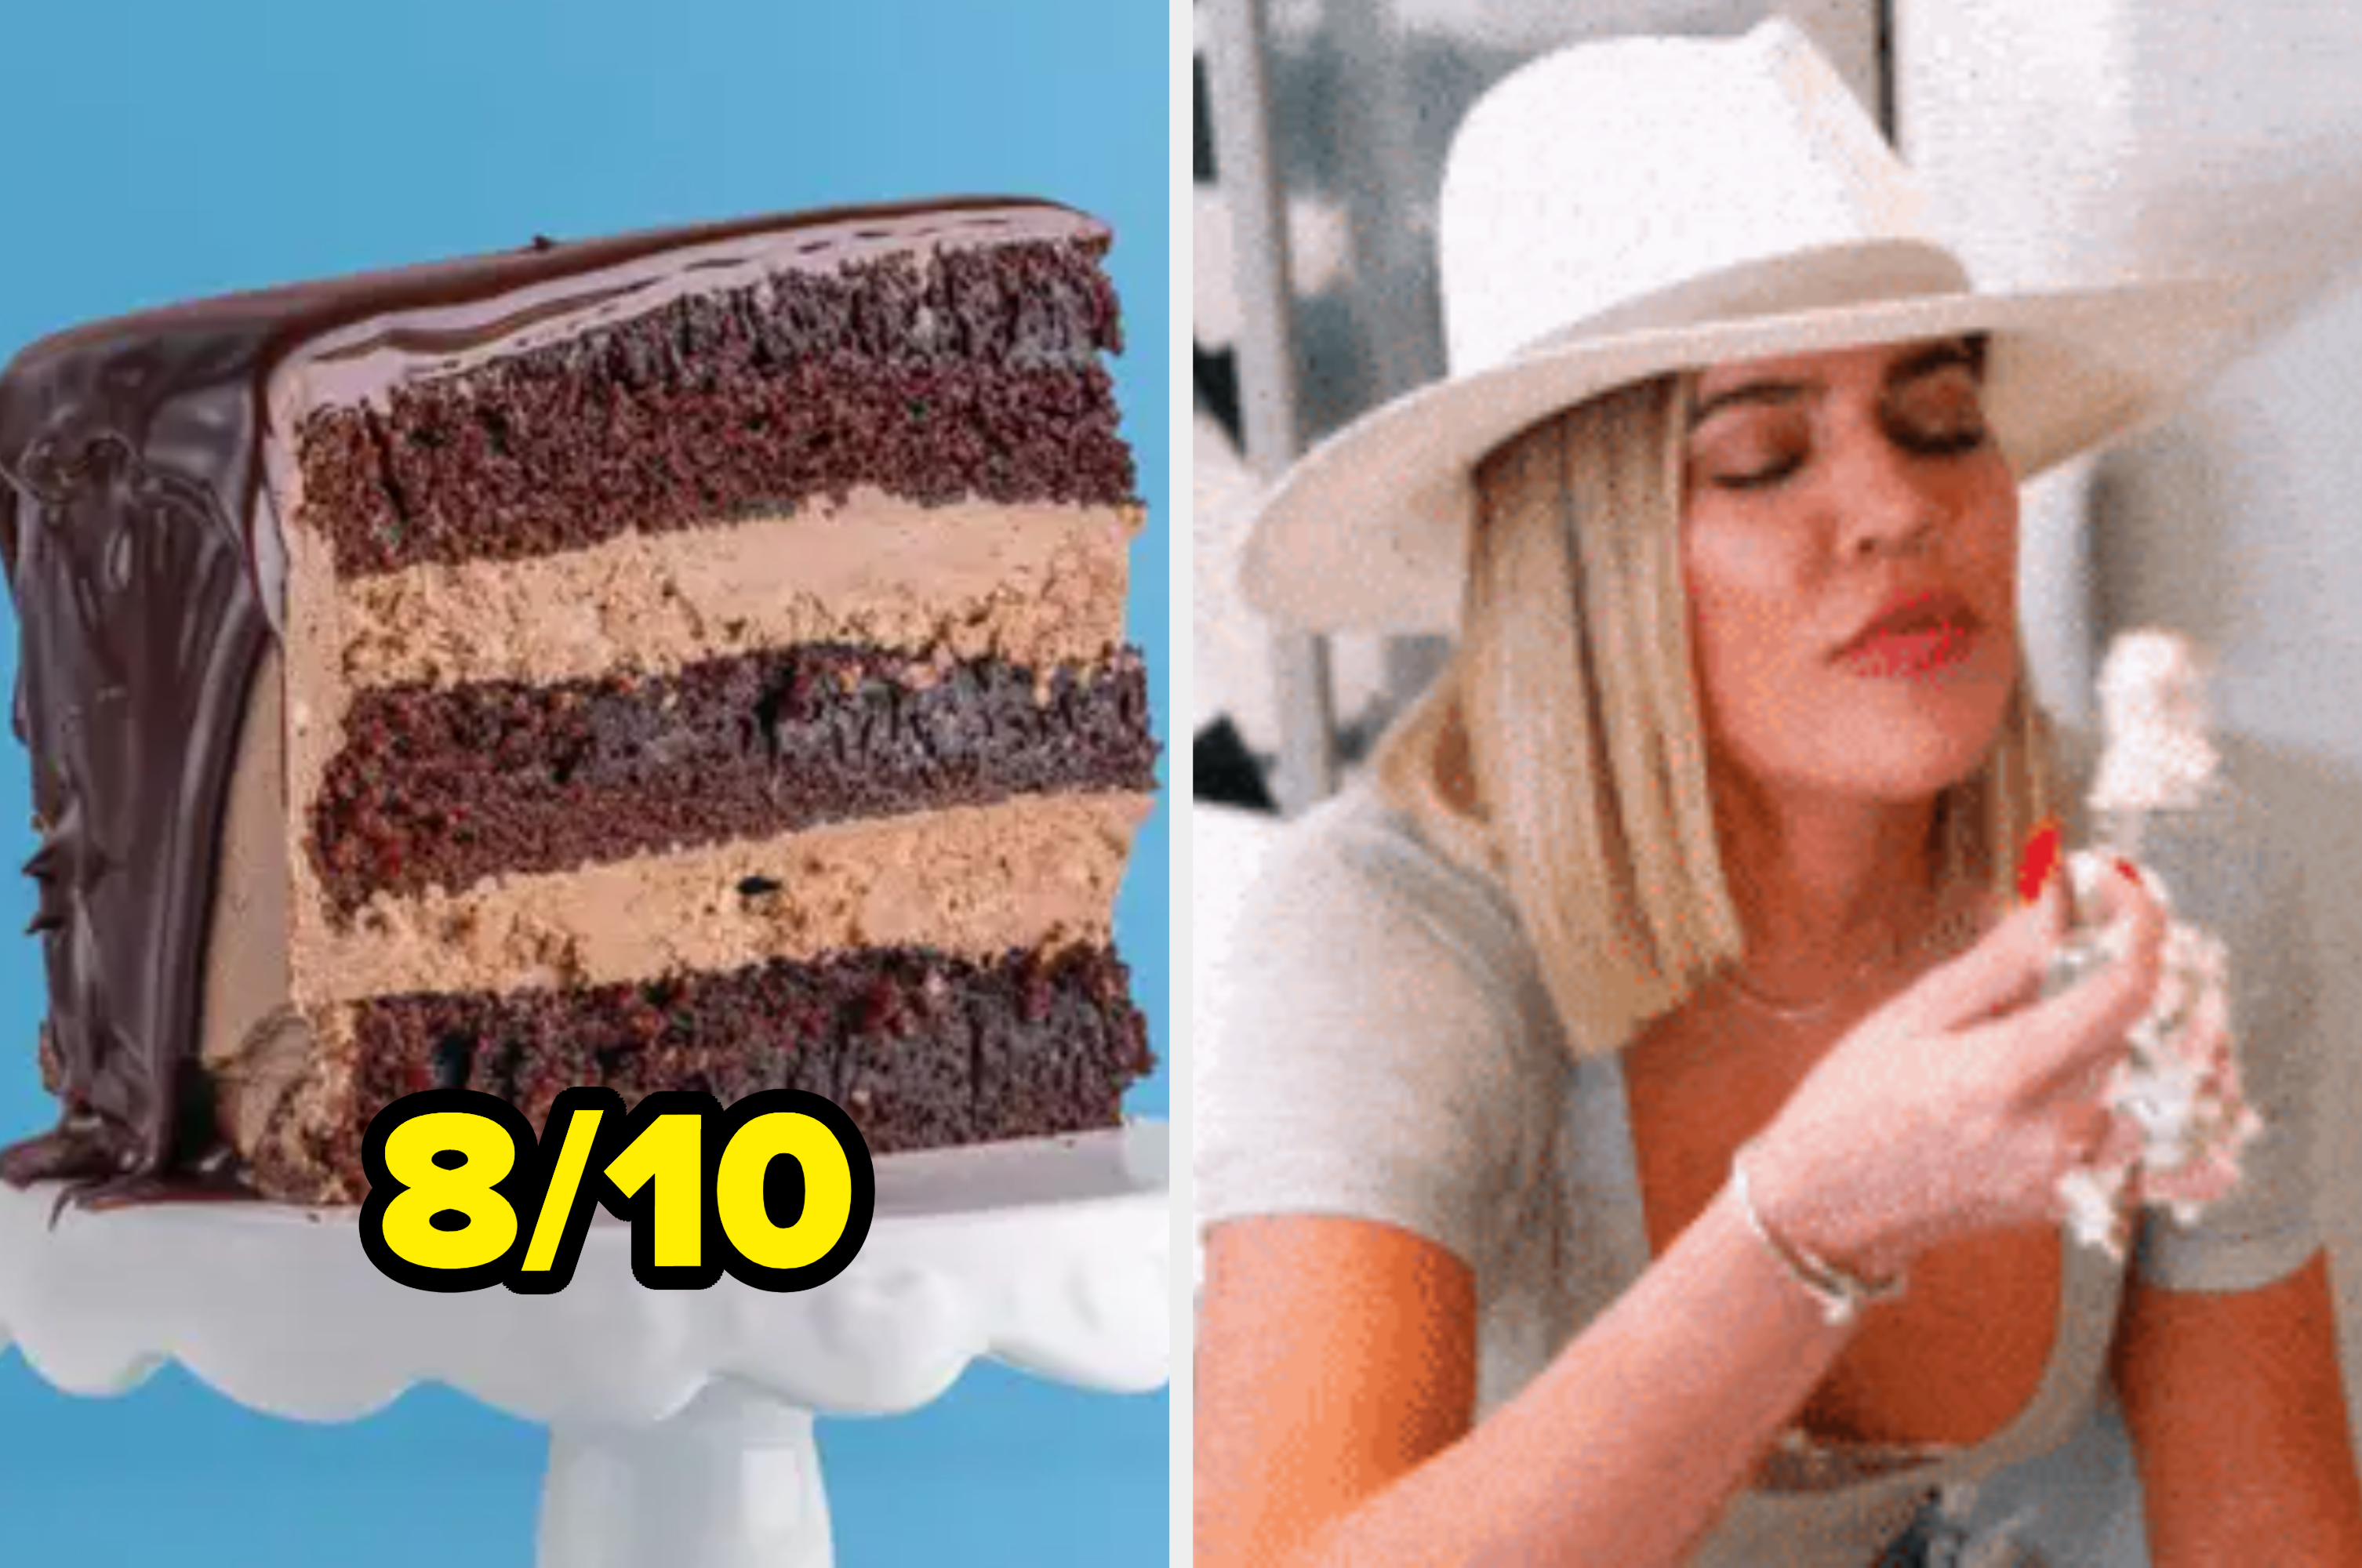 Worst Cake Trends of All Time